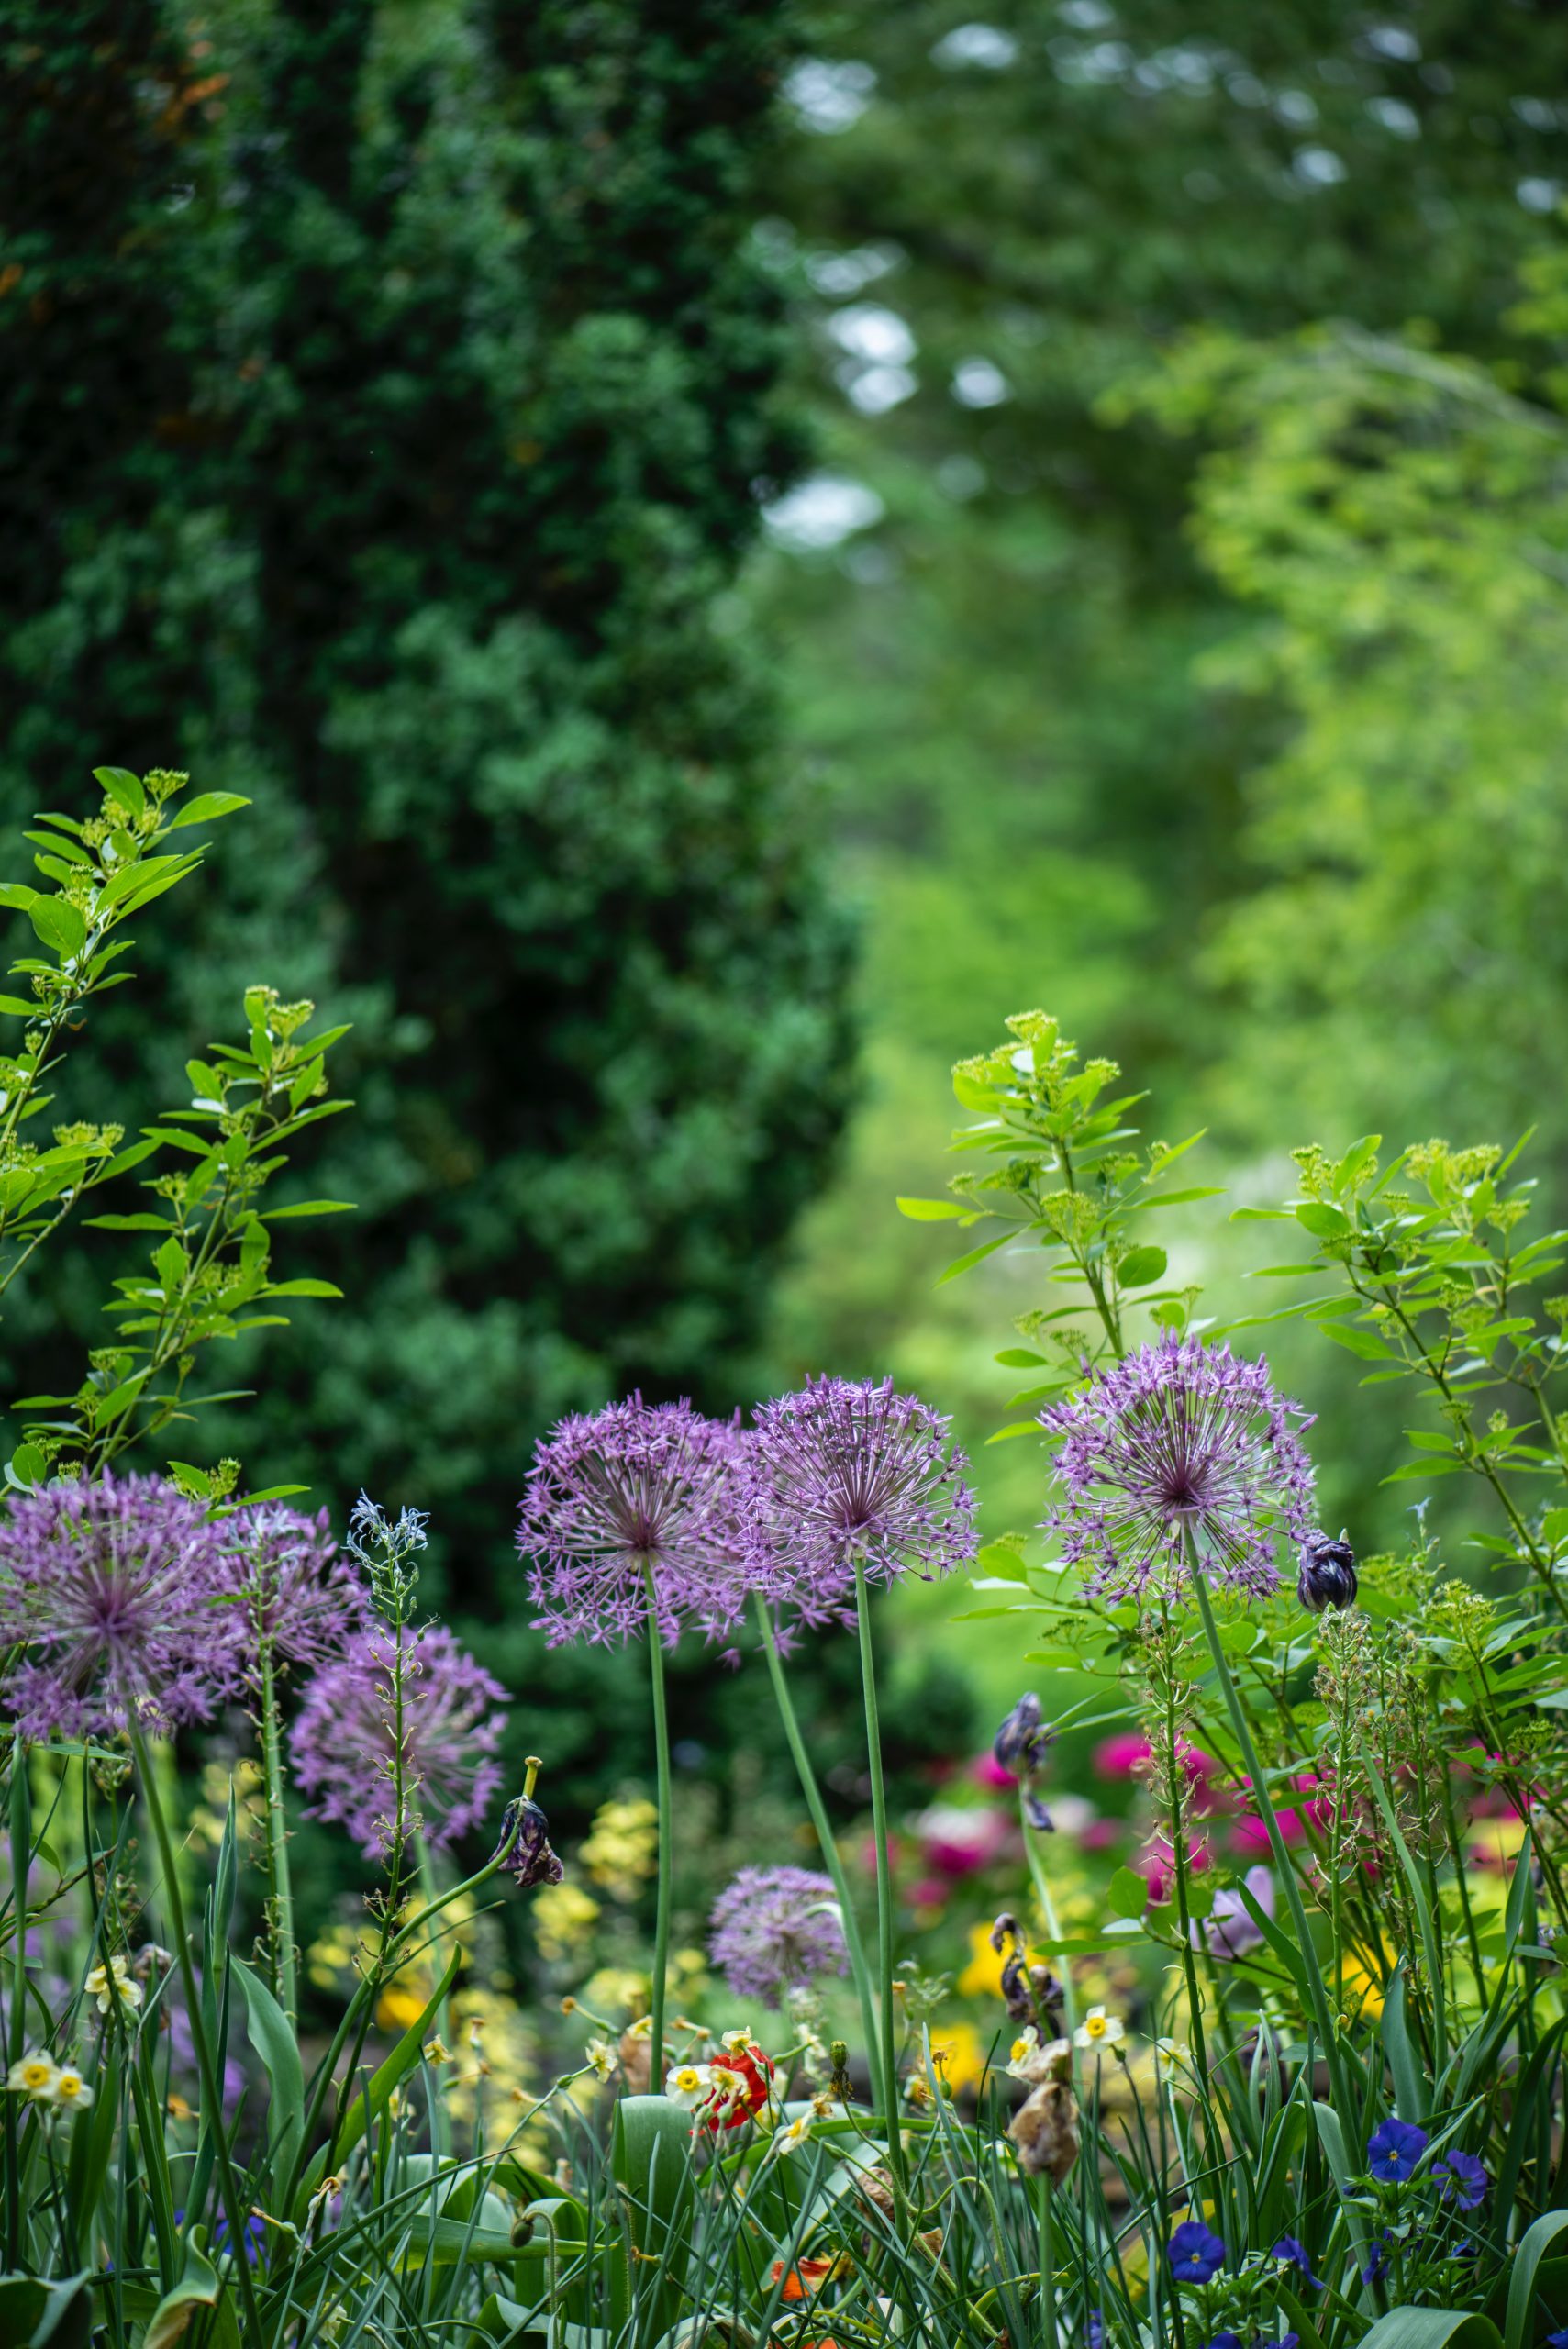 Proven ways you can eliminate weeds in your garden